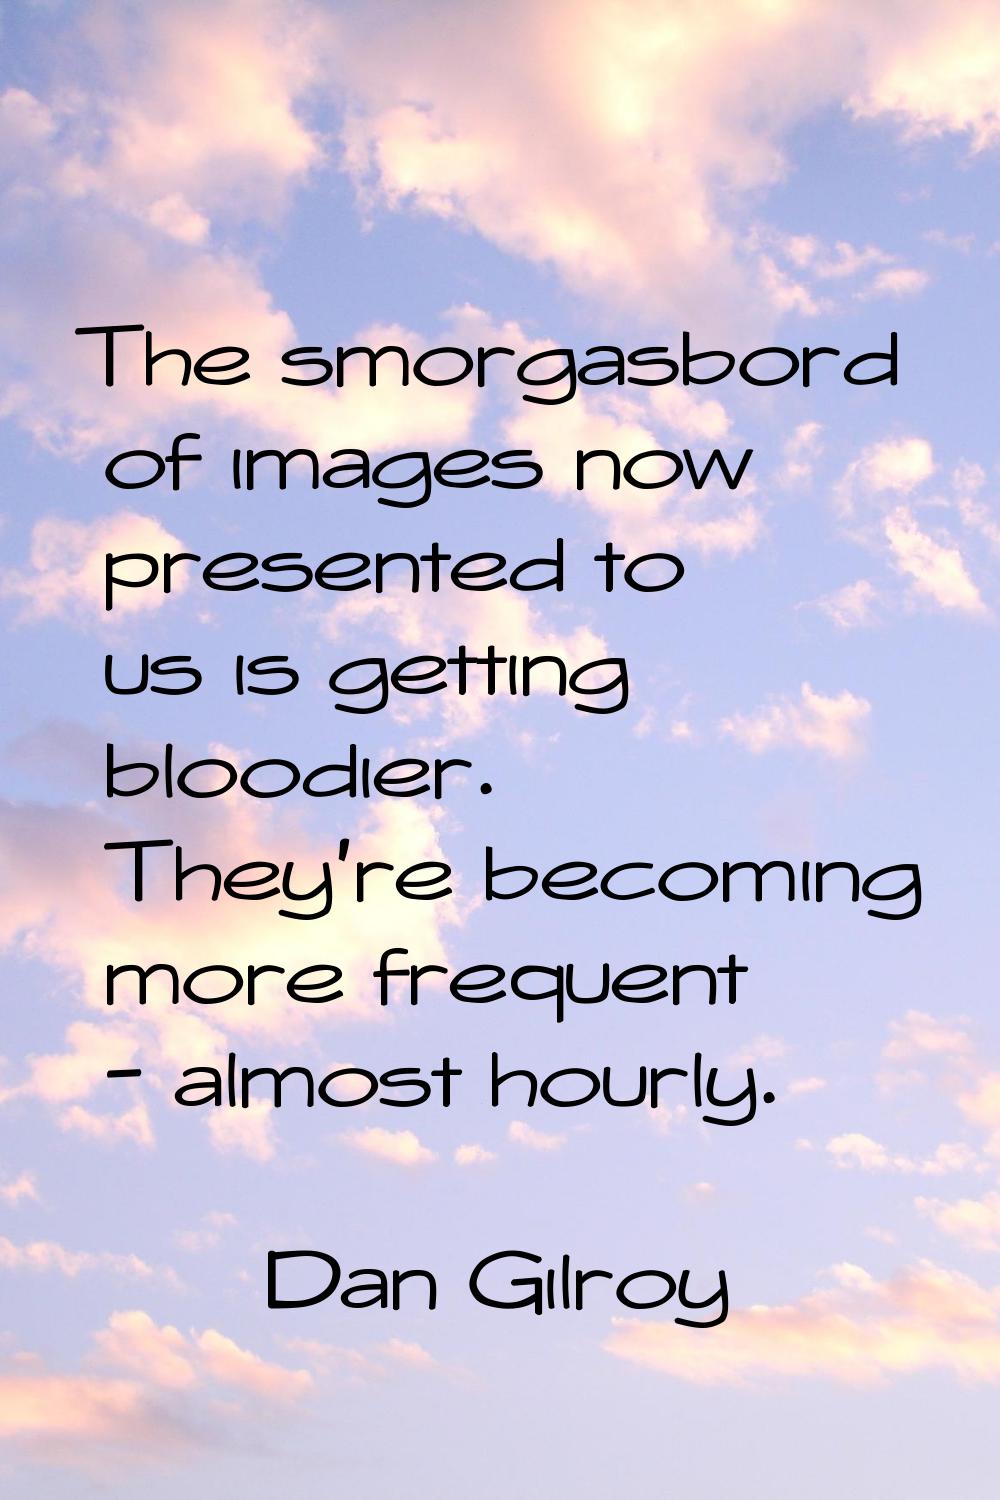 The smorgasbord of images now presented to us is getting bloodier. They're becoming more frequent -